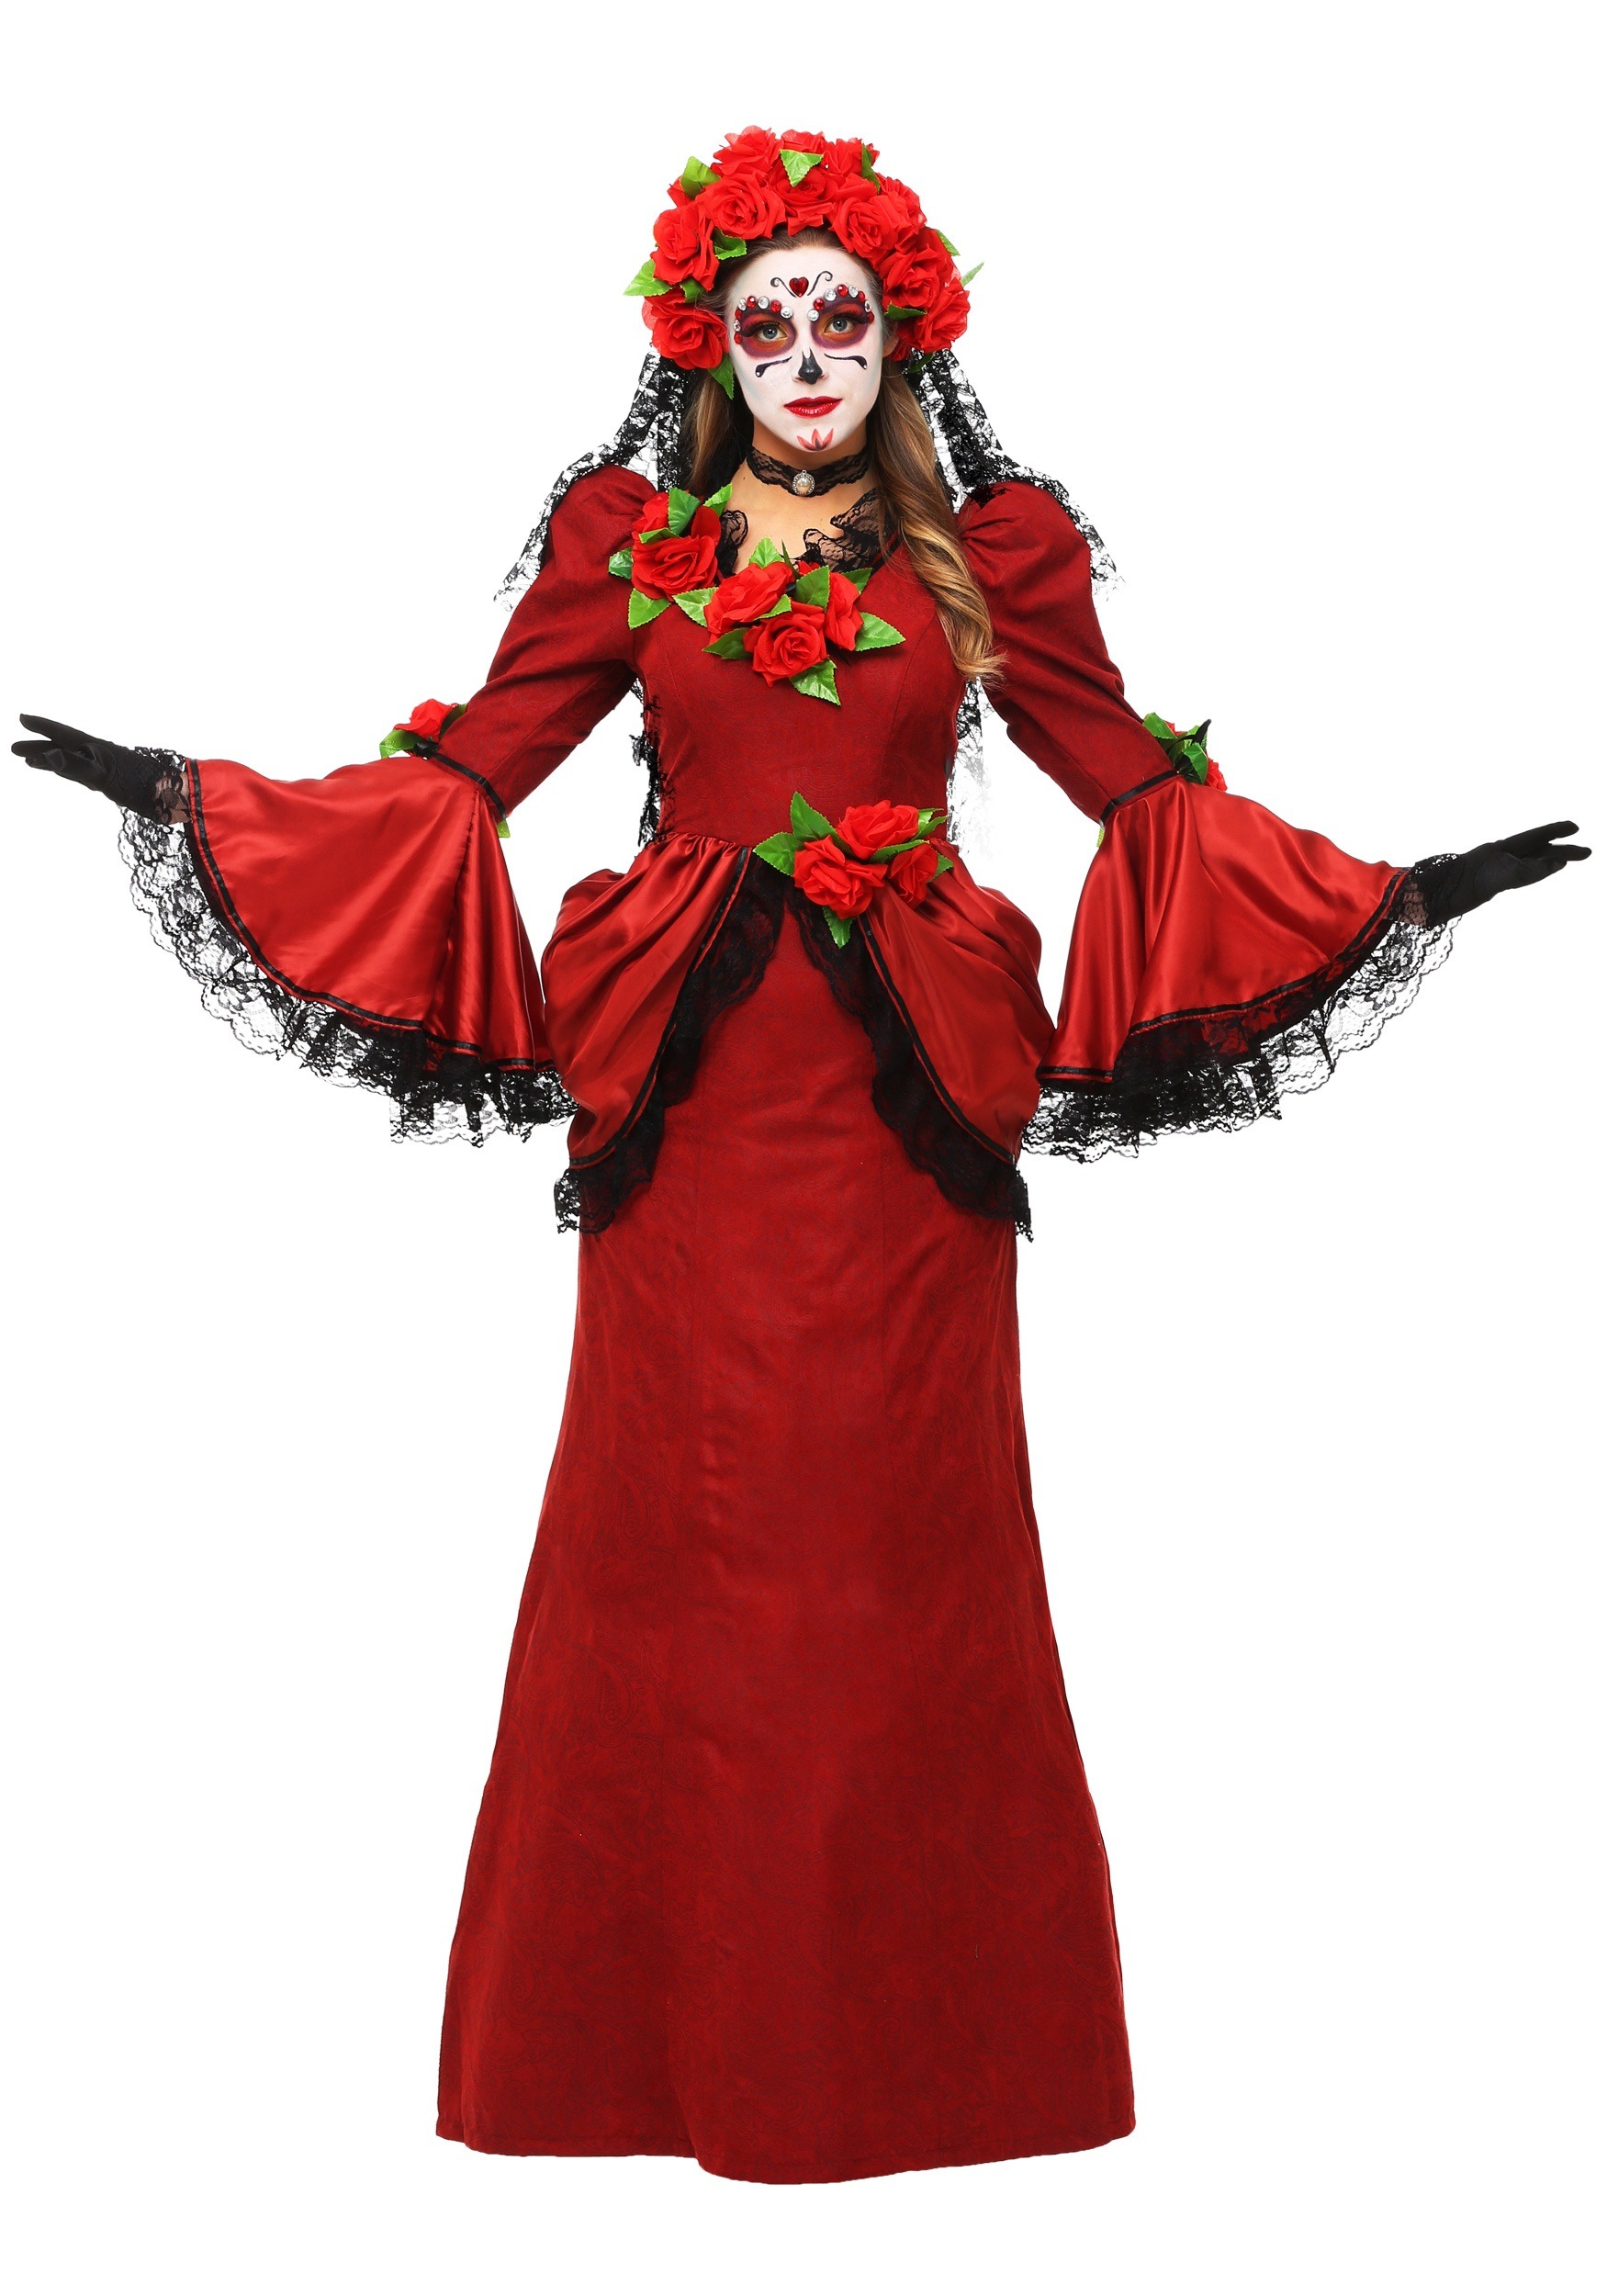 Women’s Day of the Dead Costume